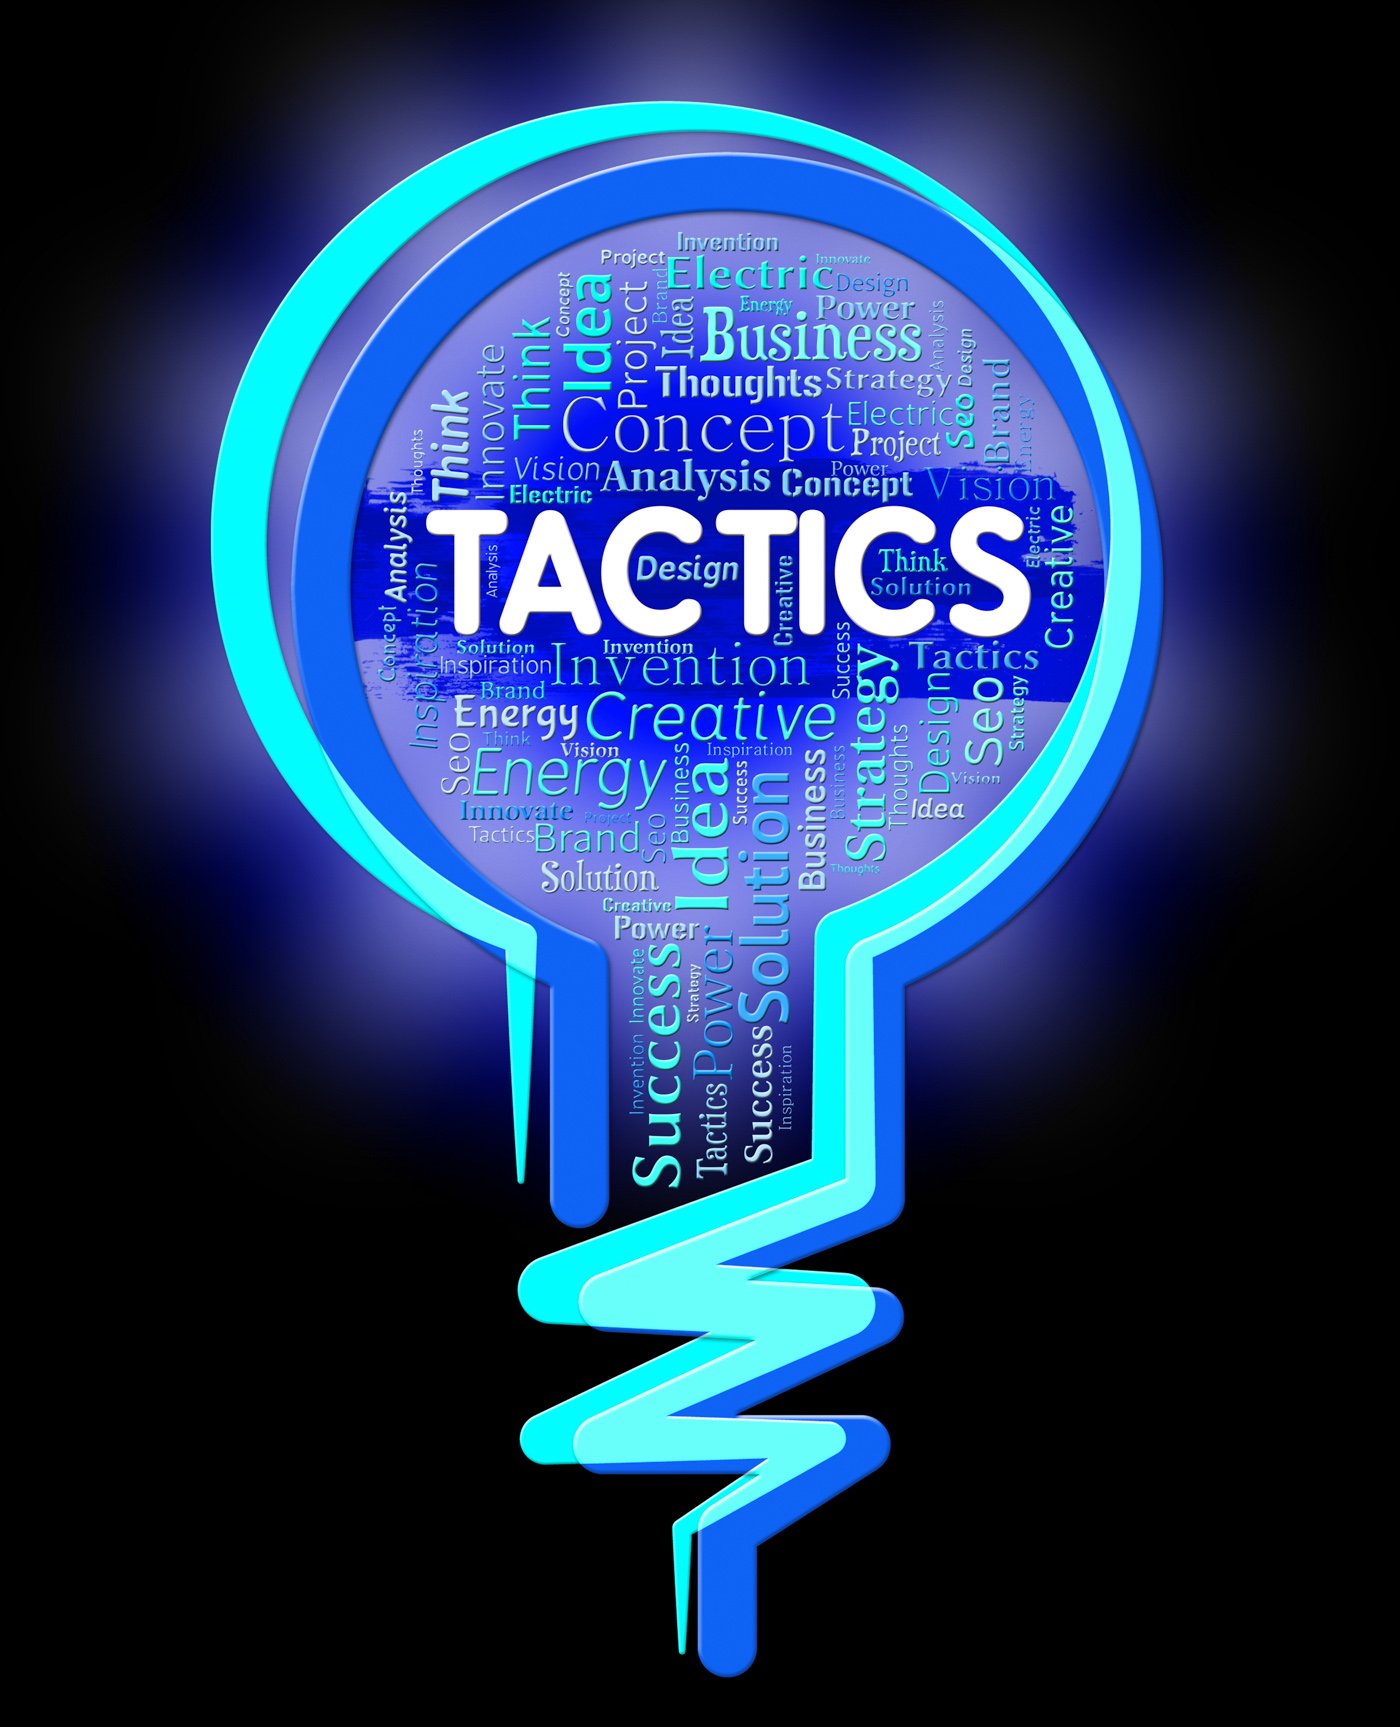 Tactics lightbulb represents strategy schemes and approach photo